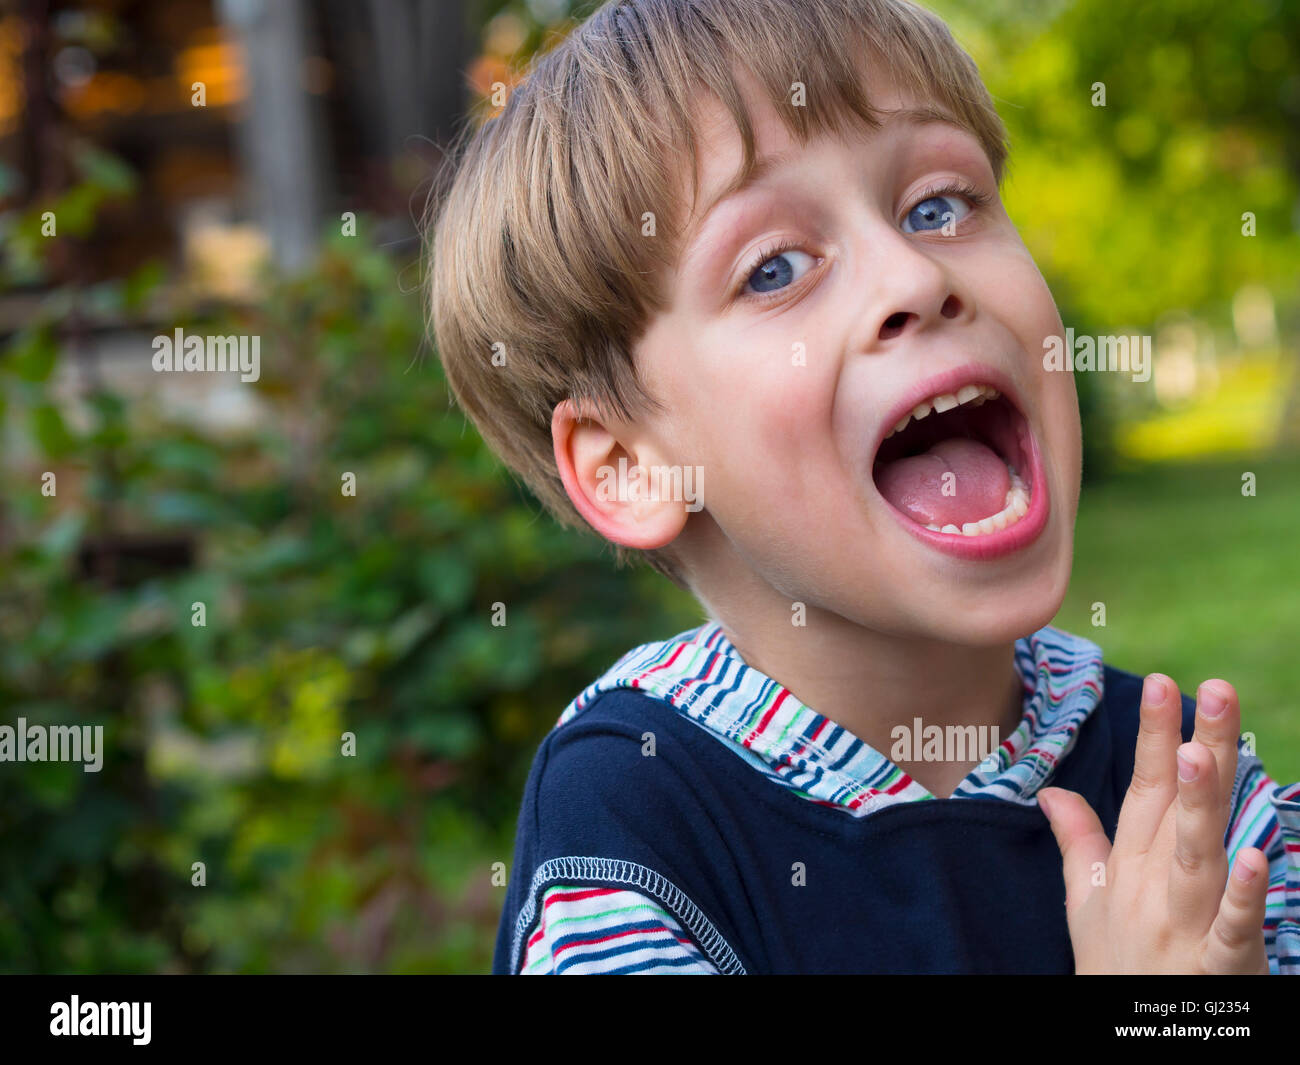 portrait of a cute boy in the nature Stock Photo